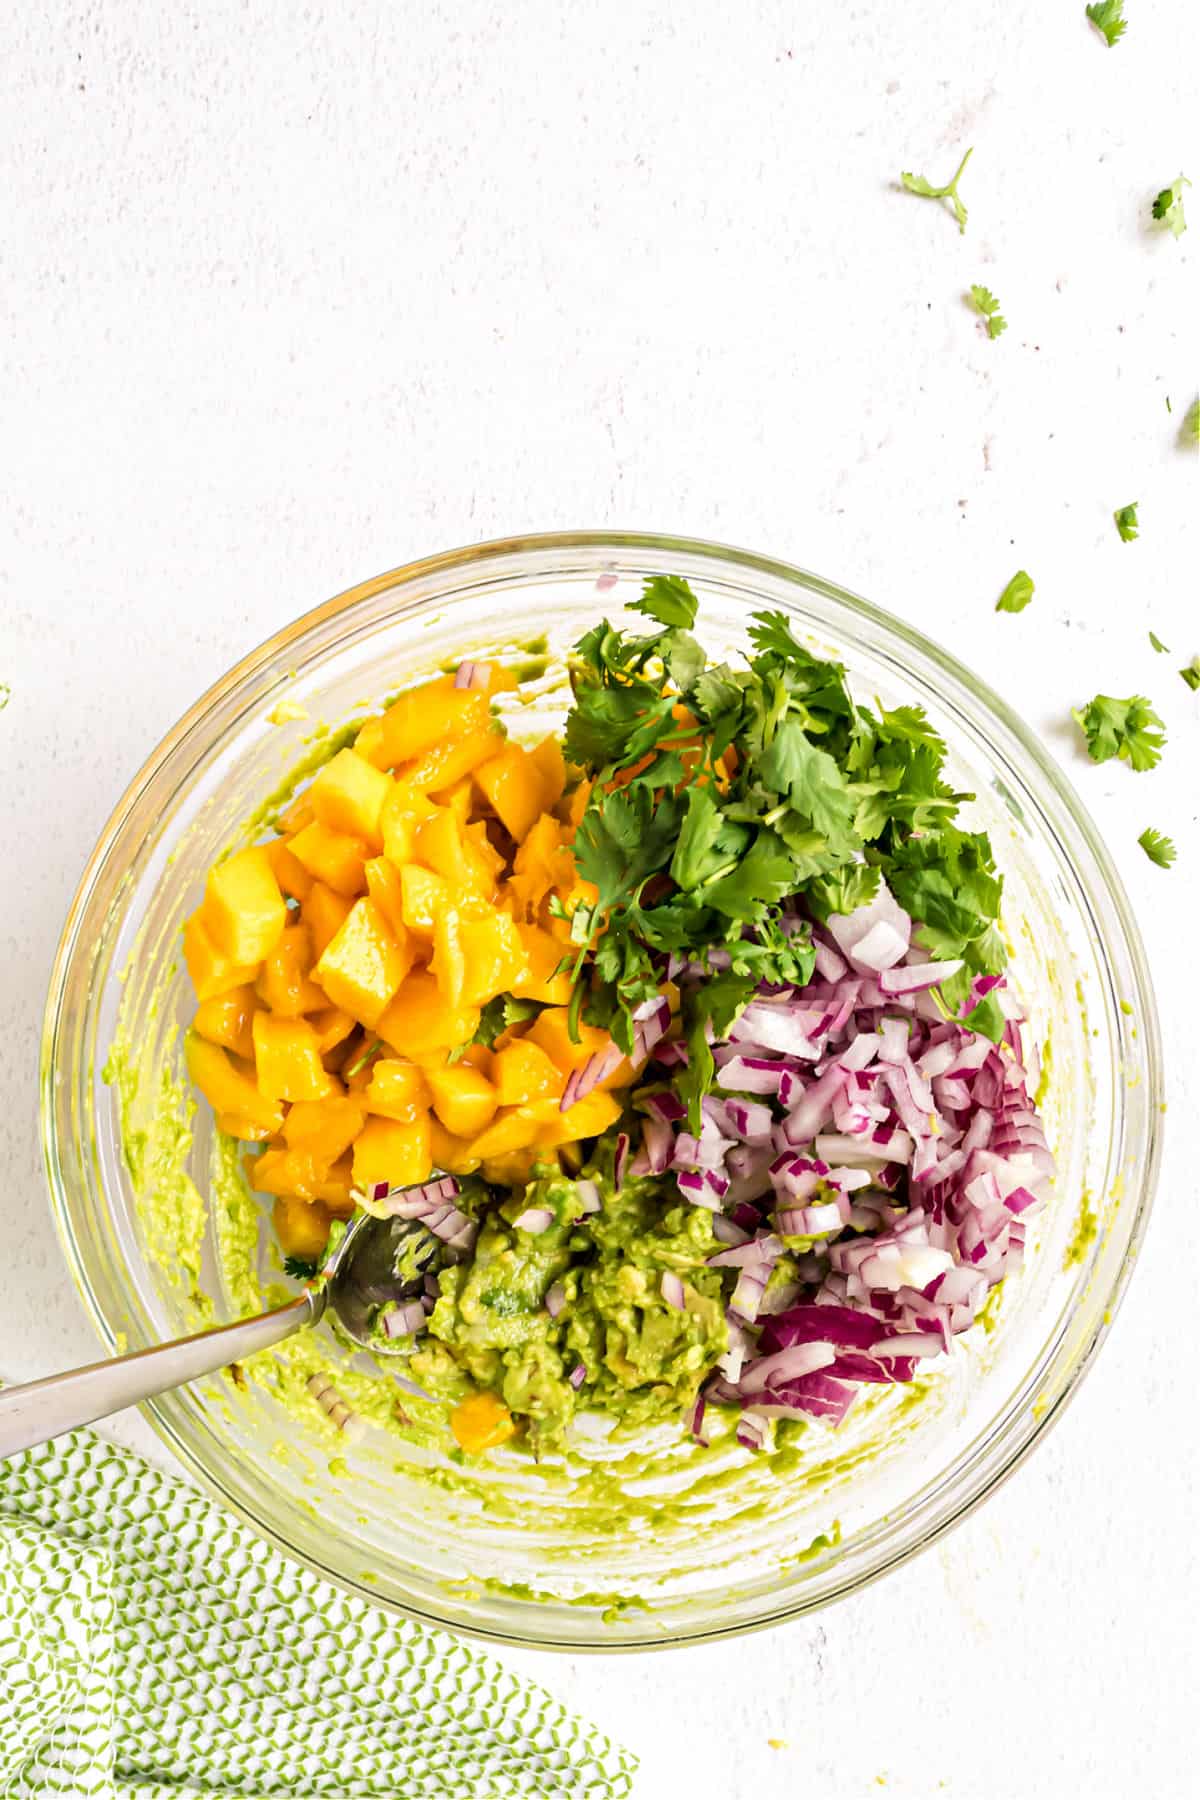 Ingredients for mango guacamole in a clear glass bowl.